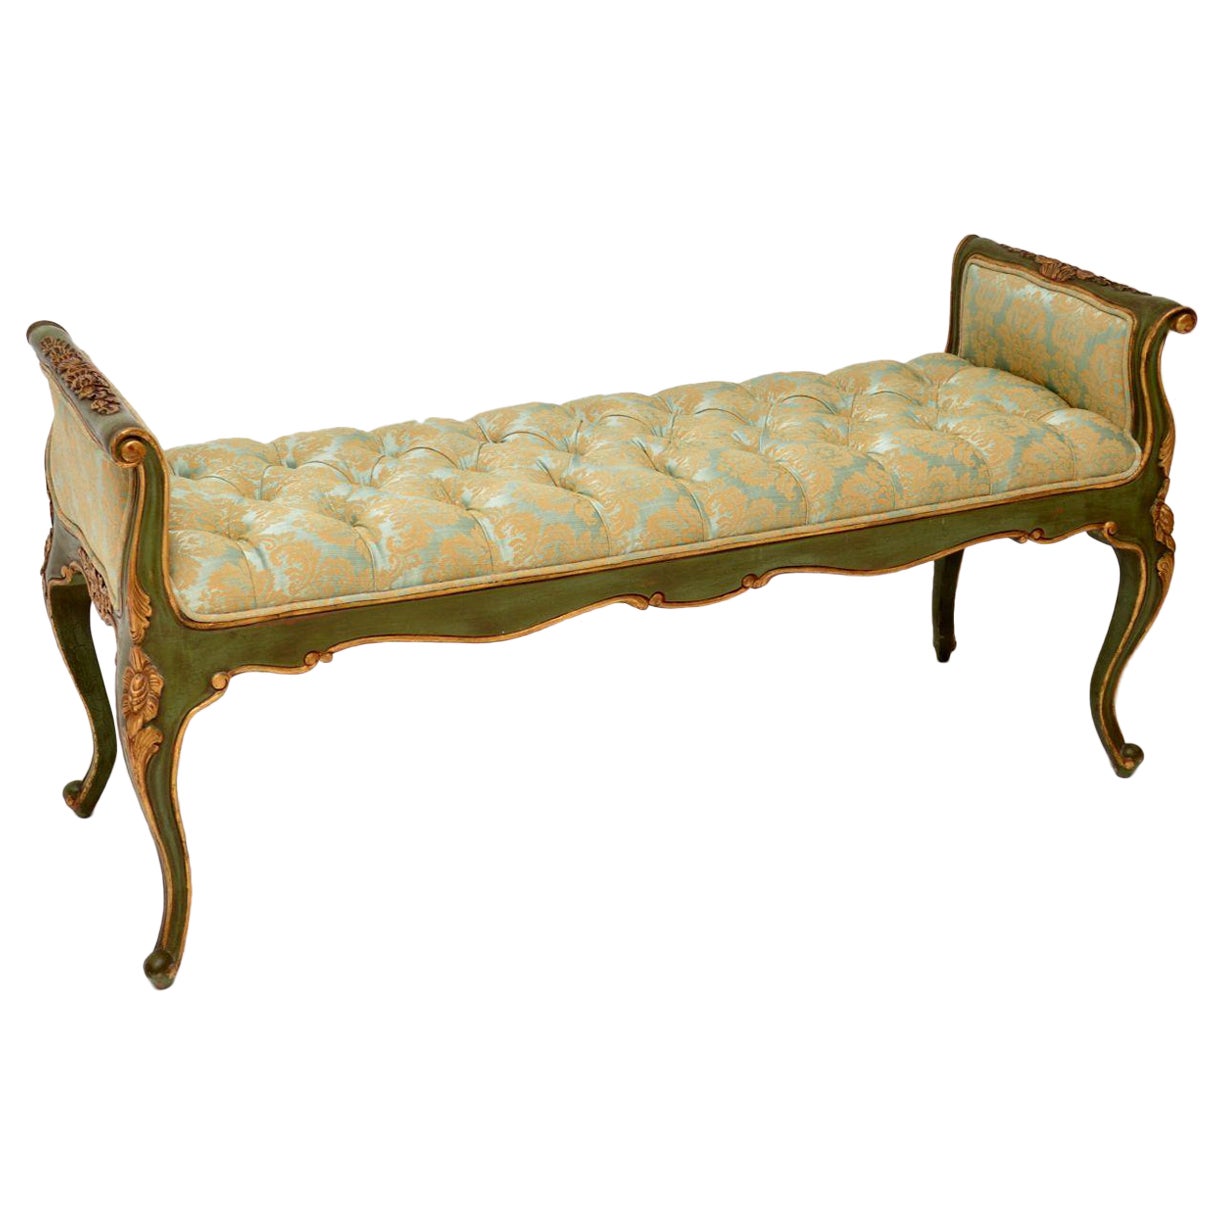 Antique French Gilt Wood Bench